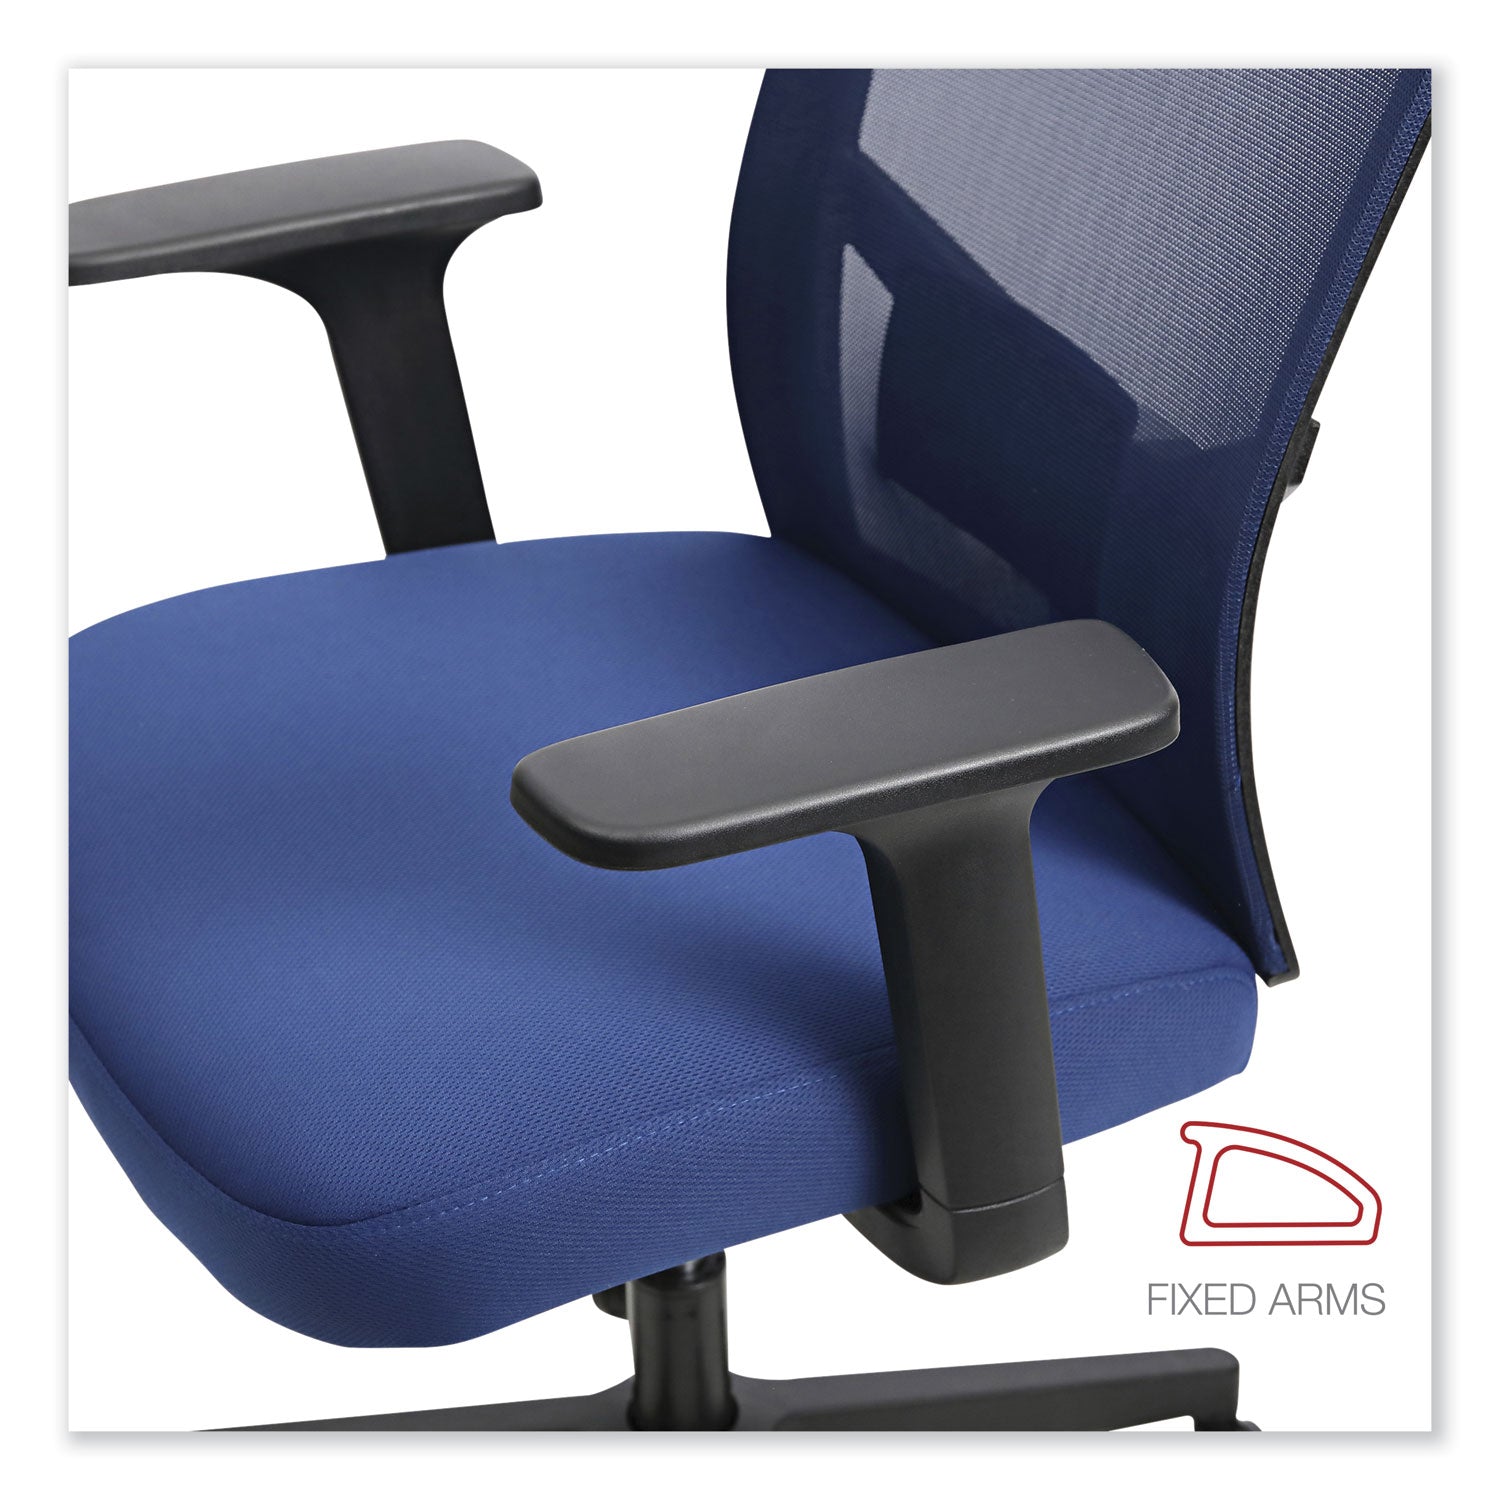 mesh-back-fabric-task-chair-supports-up-to-275-lb-1732-to-211-seat-height-navy-seat-navy-back_alews42b27 - 6